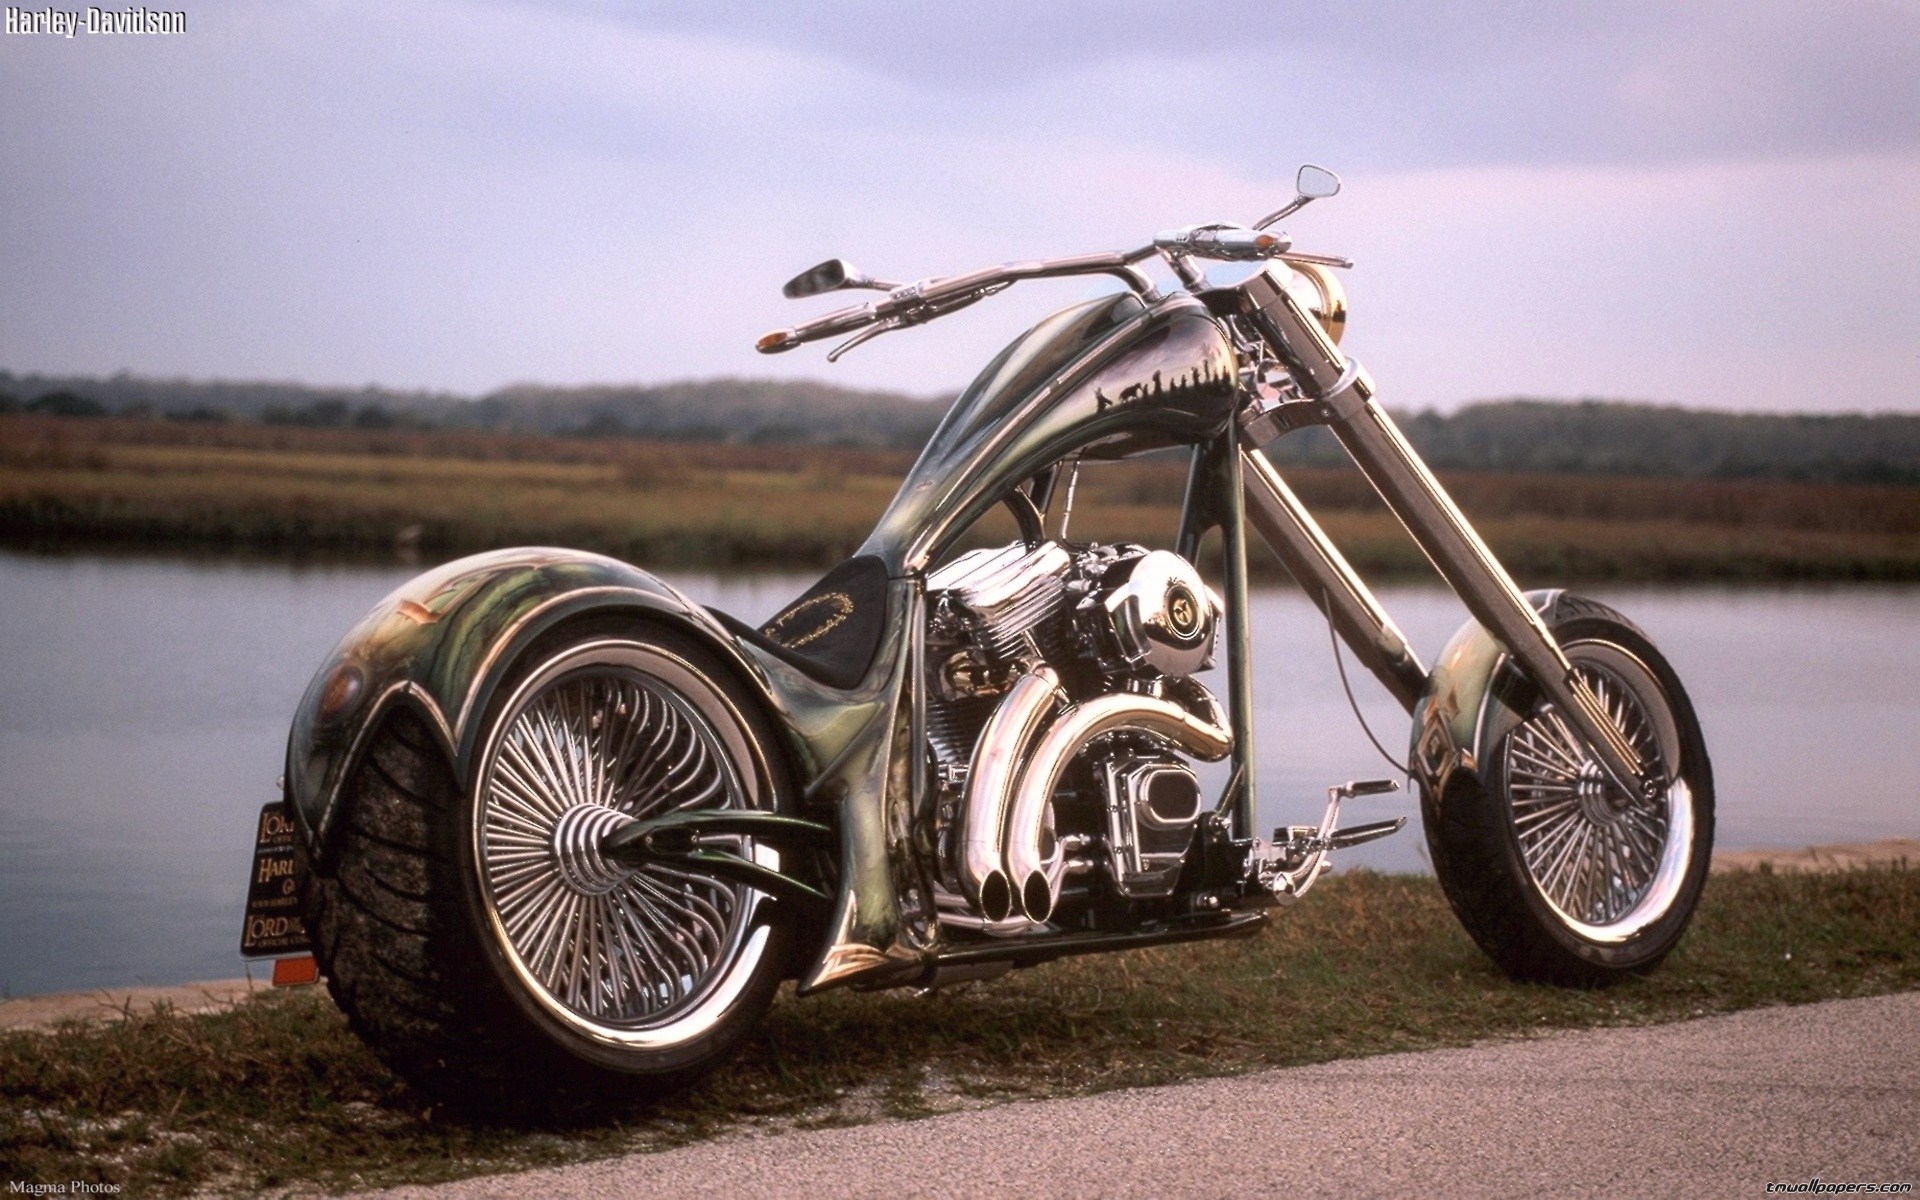 chevy - On aime ou on n'aime pas ? - Page 4 466842HarleyDavidsonChopper1920x1200111